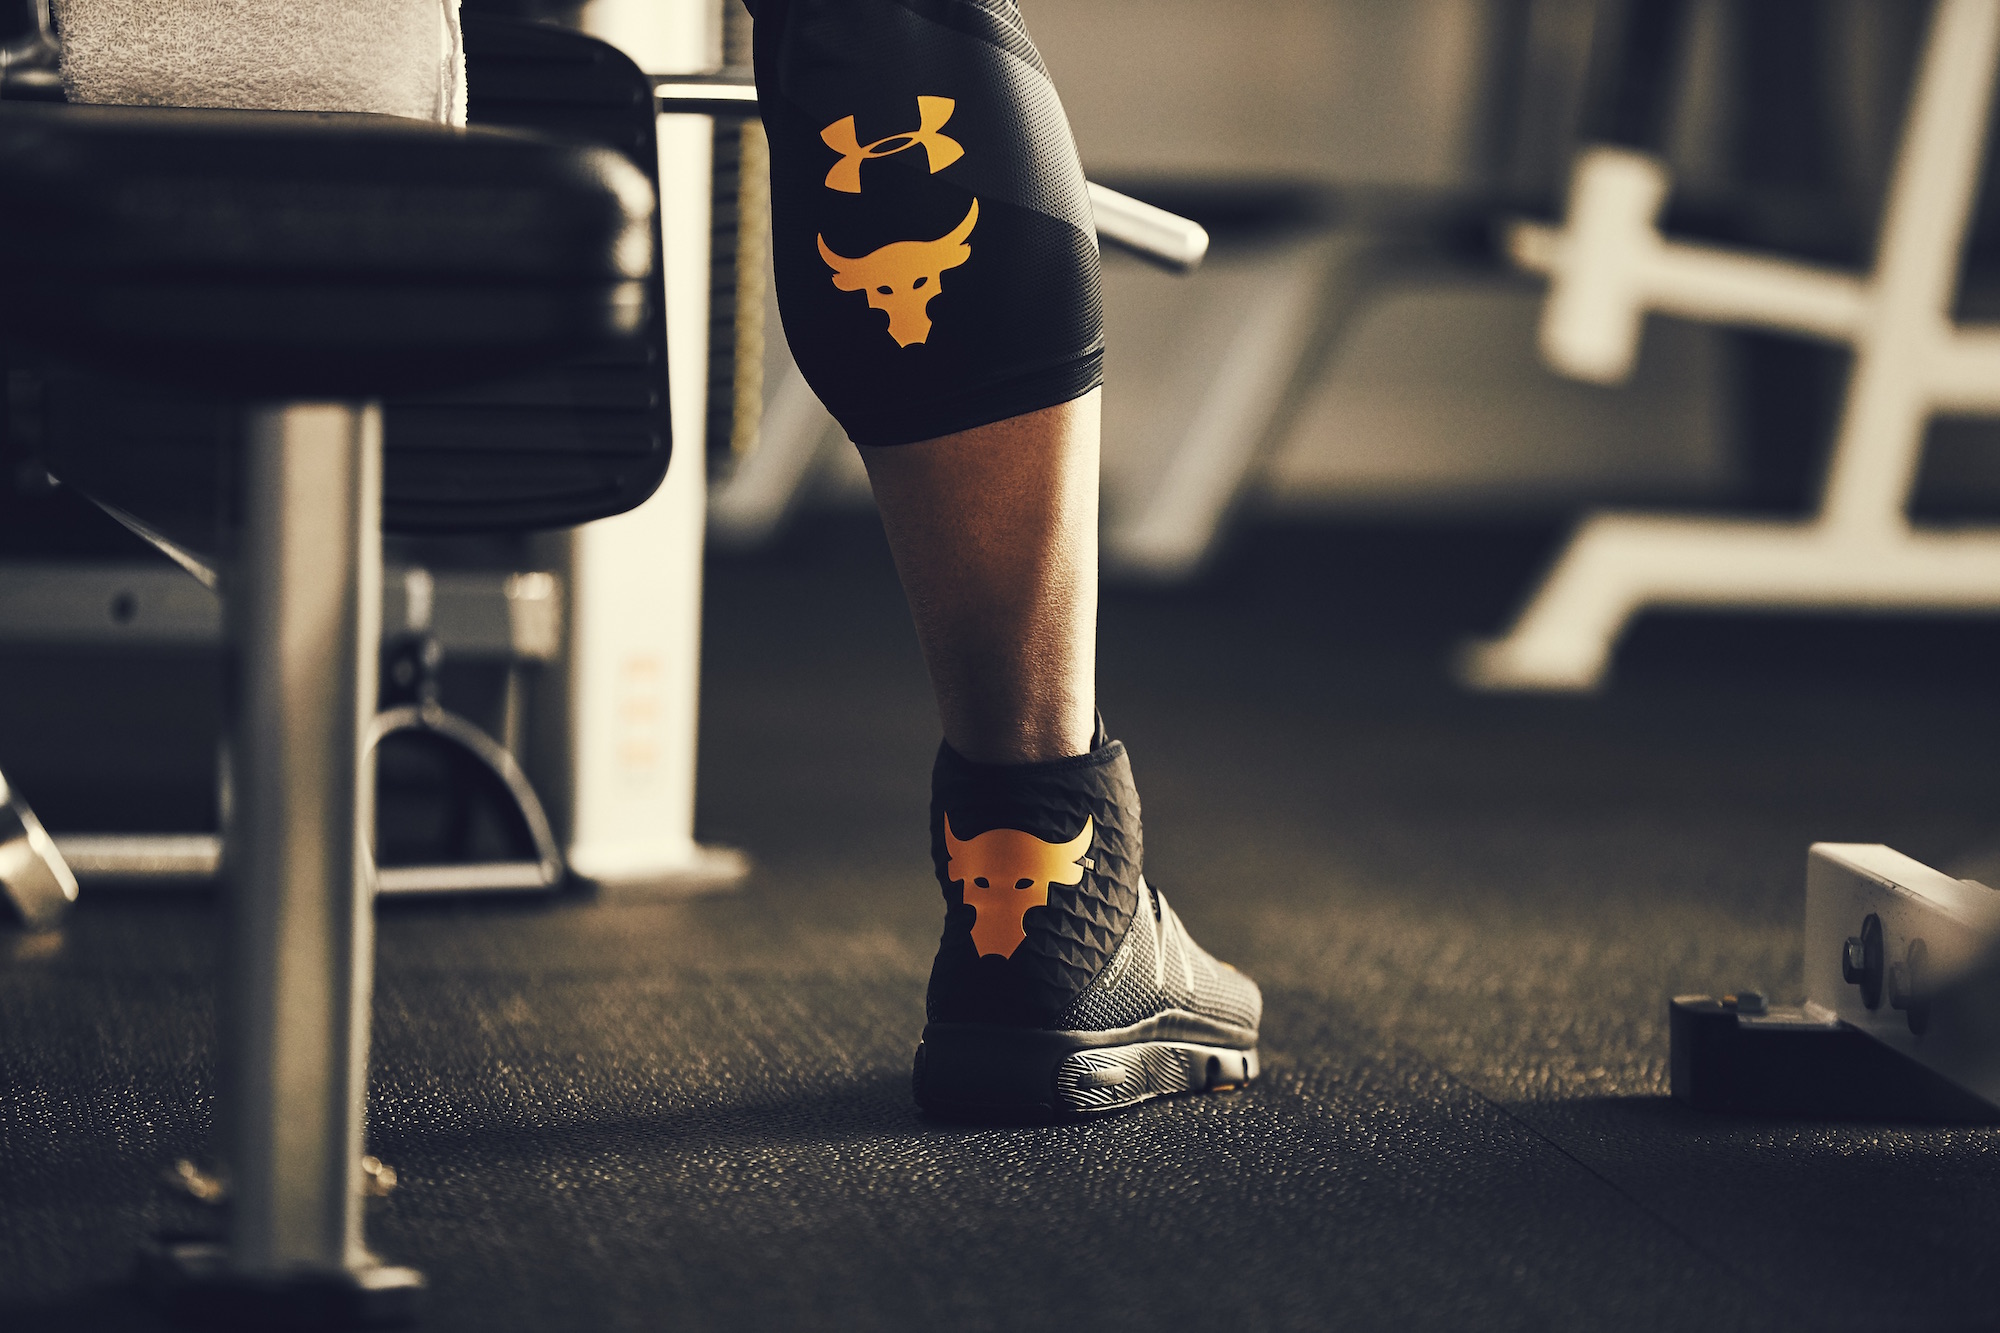 The Rock x Under Armour Project Rock Delta Available Now